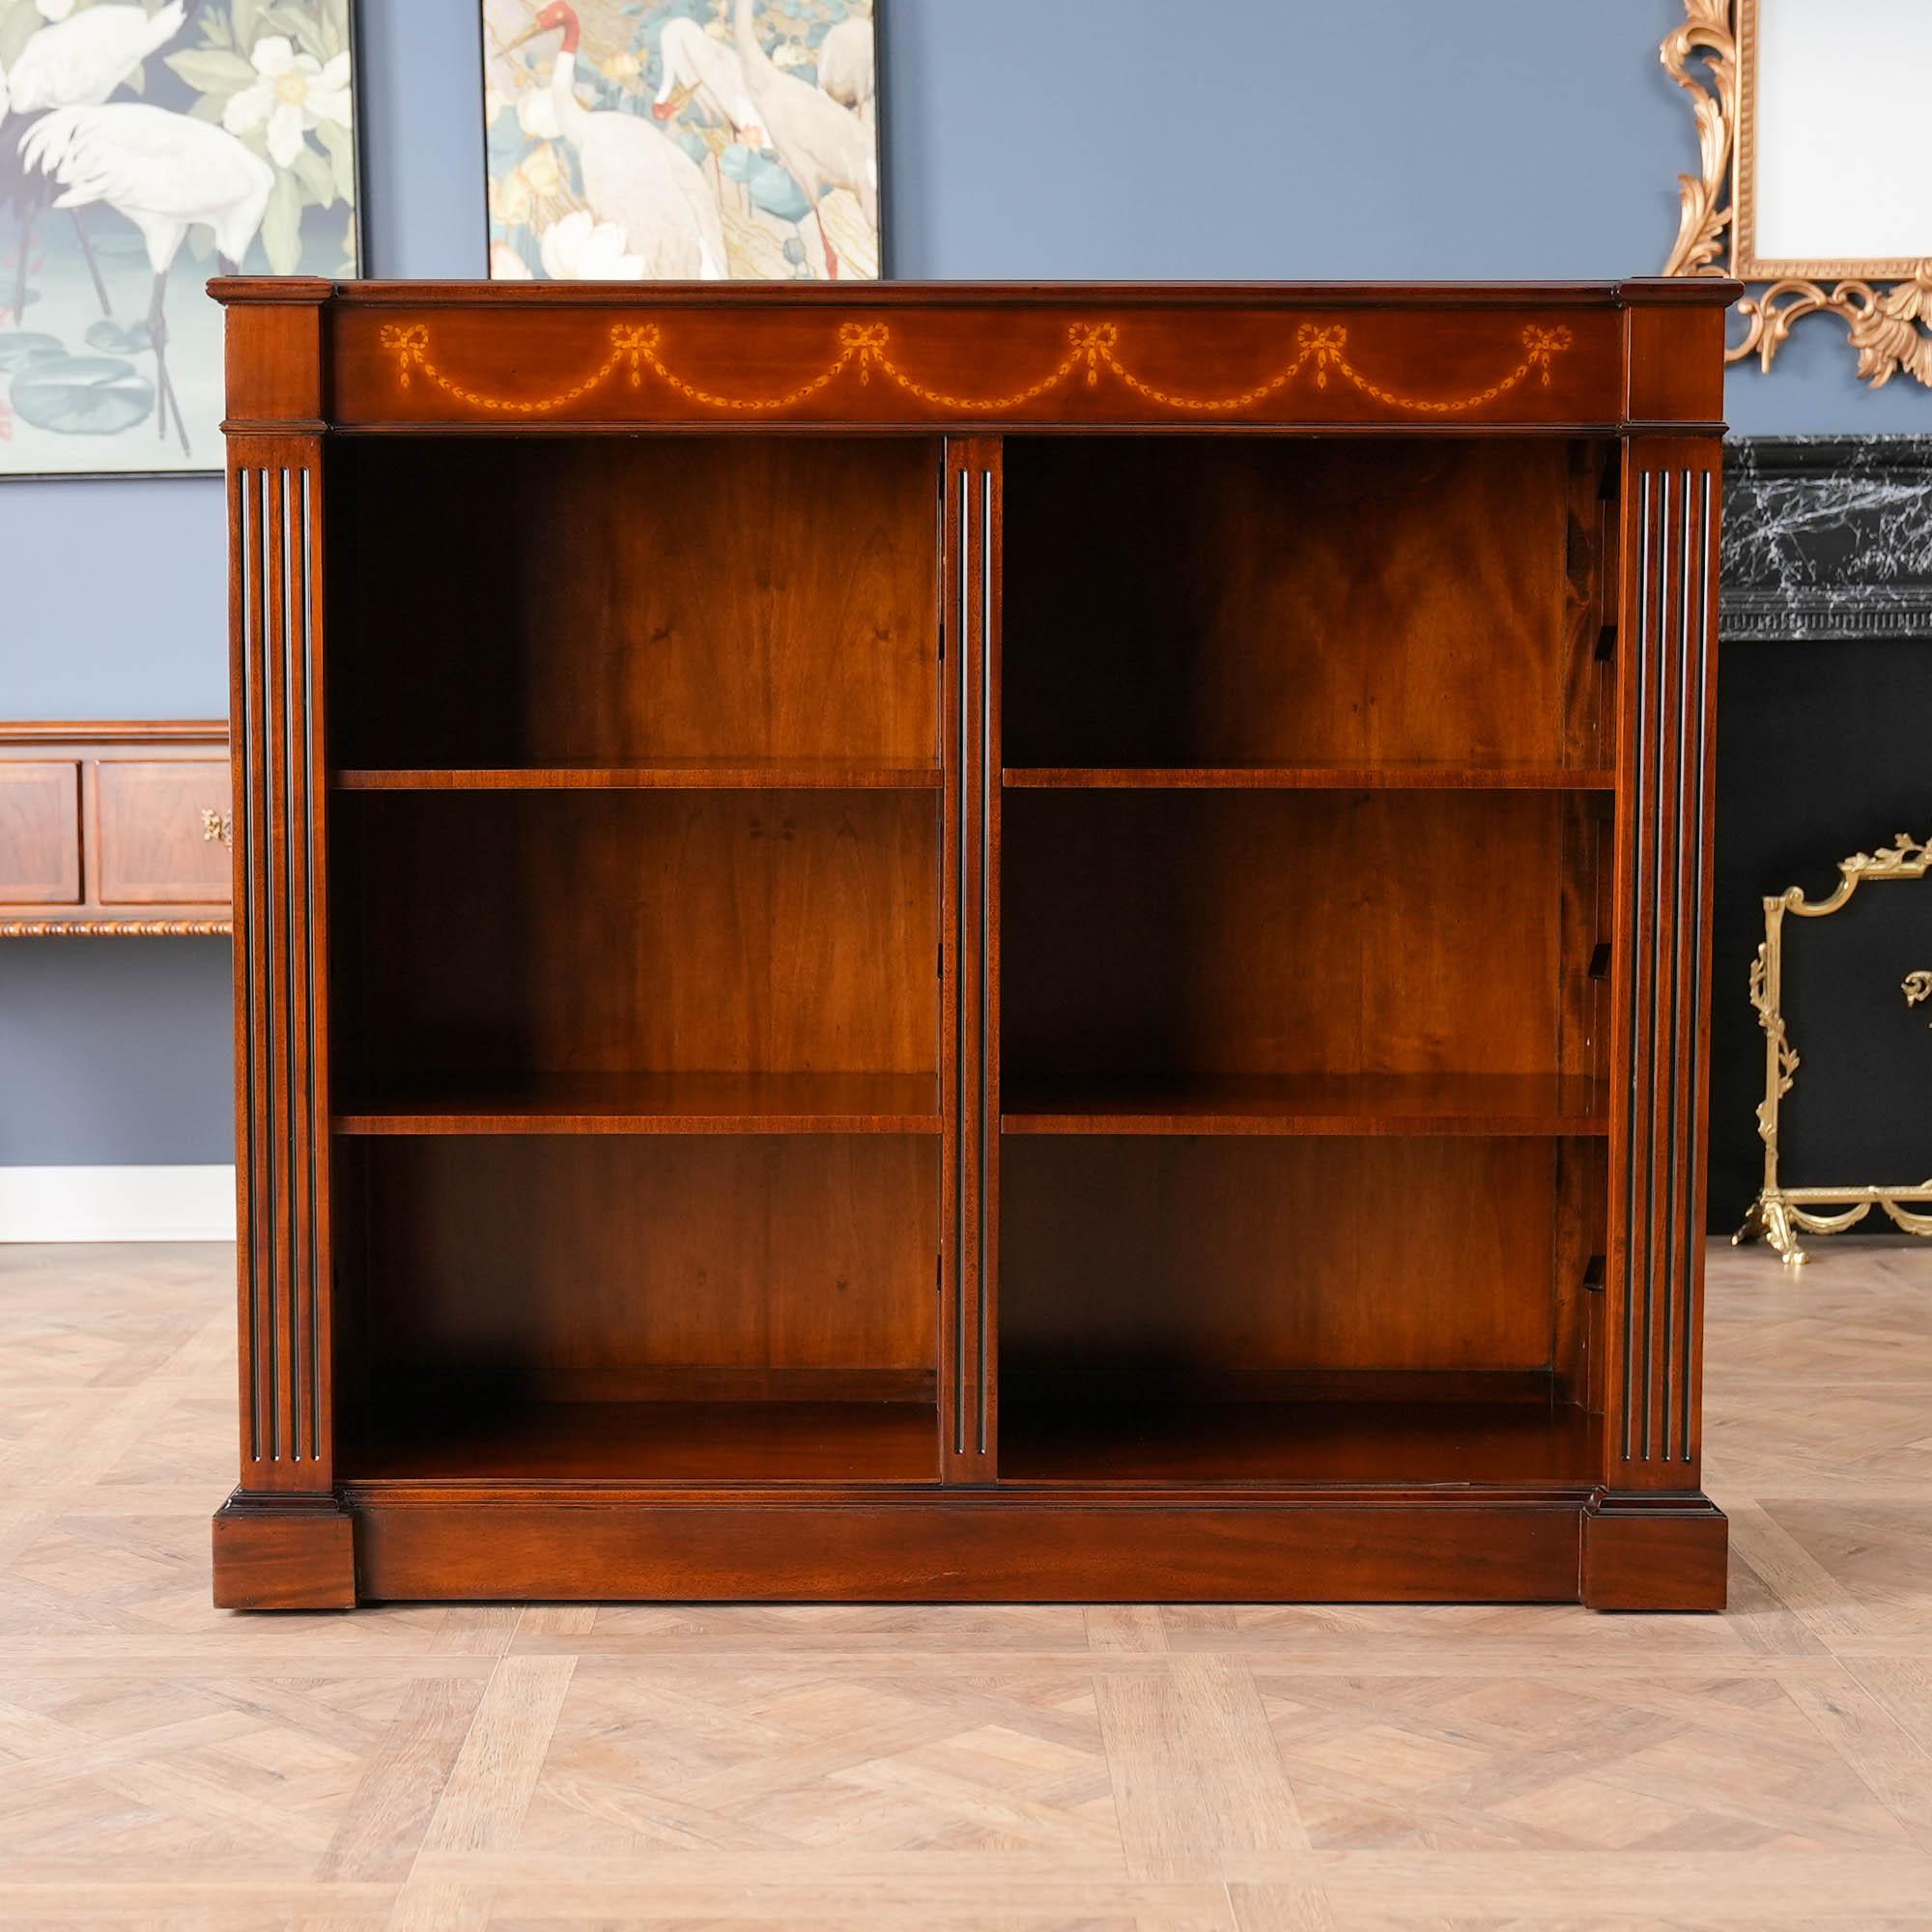 An excellent quality Mahogany Open Bookcase produced by Niagara Furniture. The top section features a moulded cornice with hand cut satinwood inlays arranged in a drape pattern. The open section being divided by a central reeded column for support